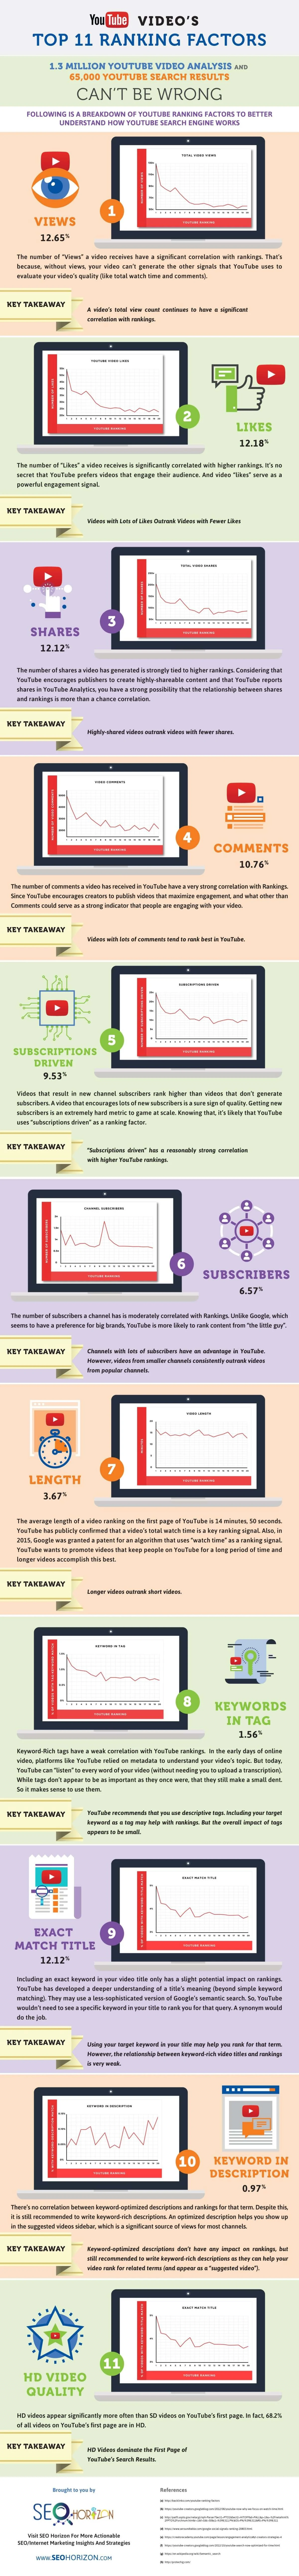 Youtube Video Seo: 11 Little Known Youtube Videos Ranking Factors - #infographic